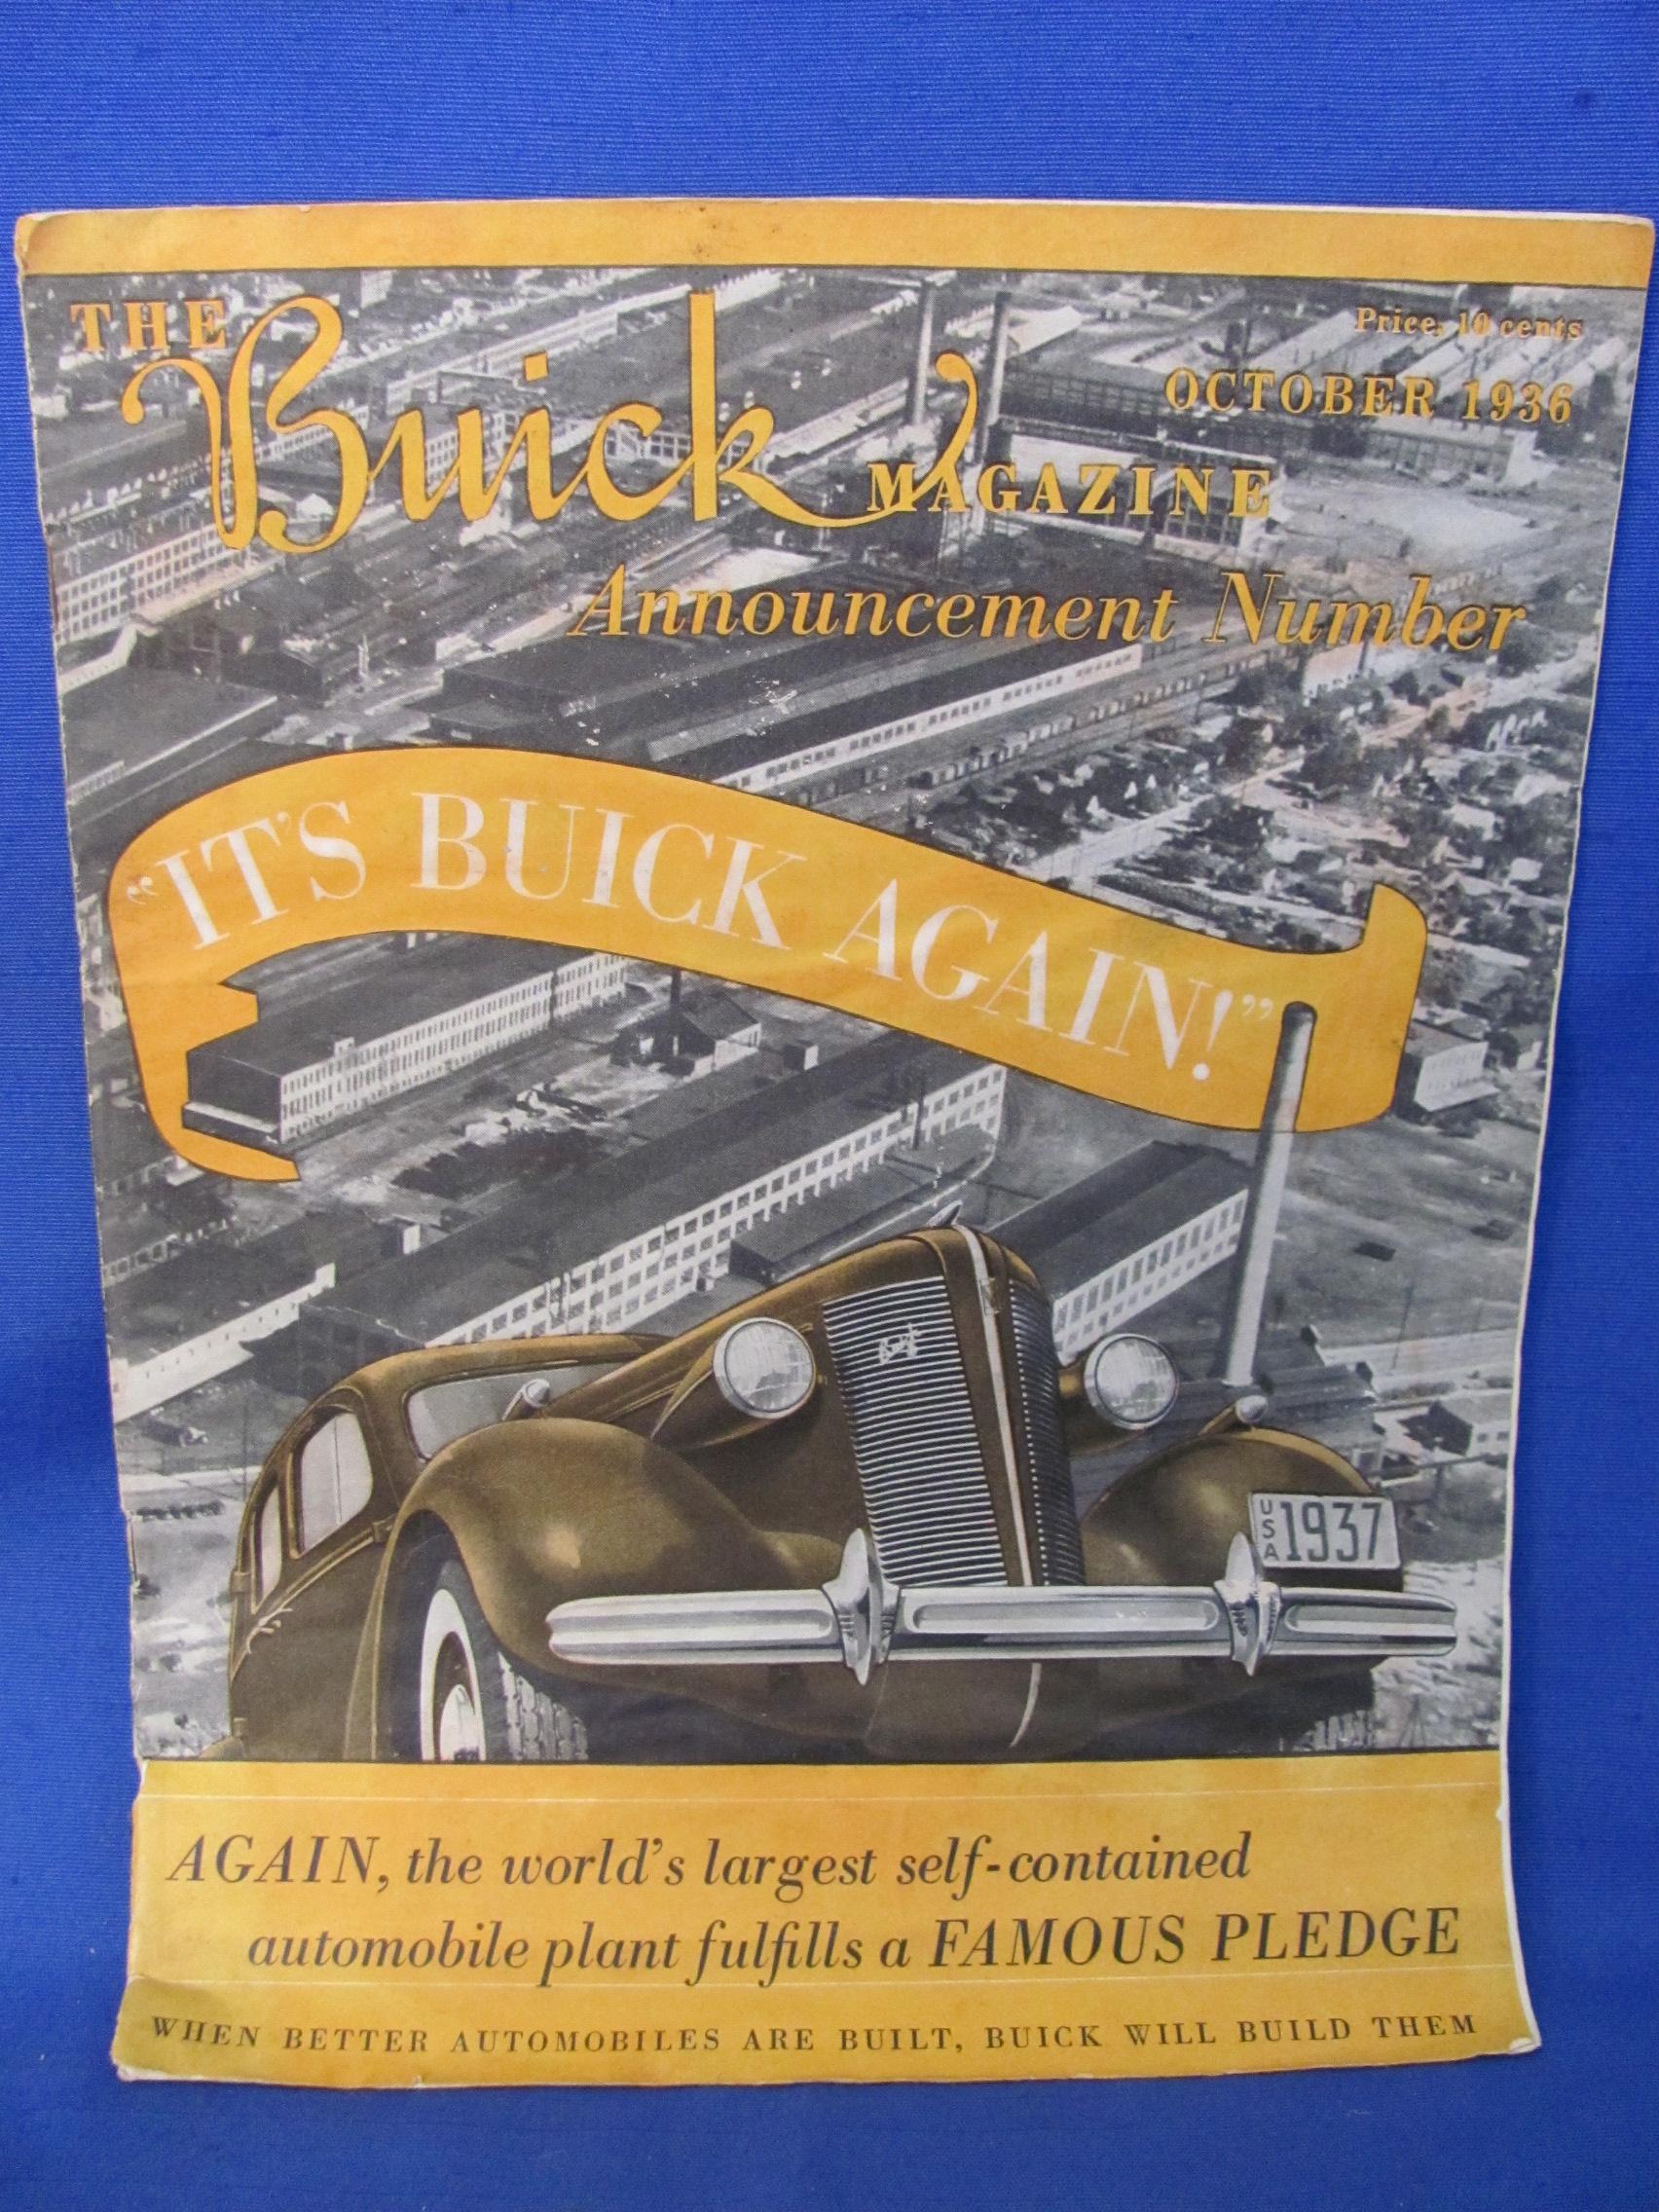 Buick 1936 - The Buick Magazine Announcement Number - October 